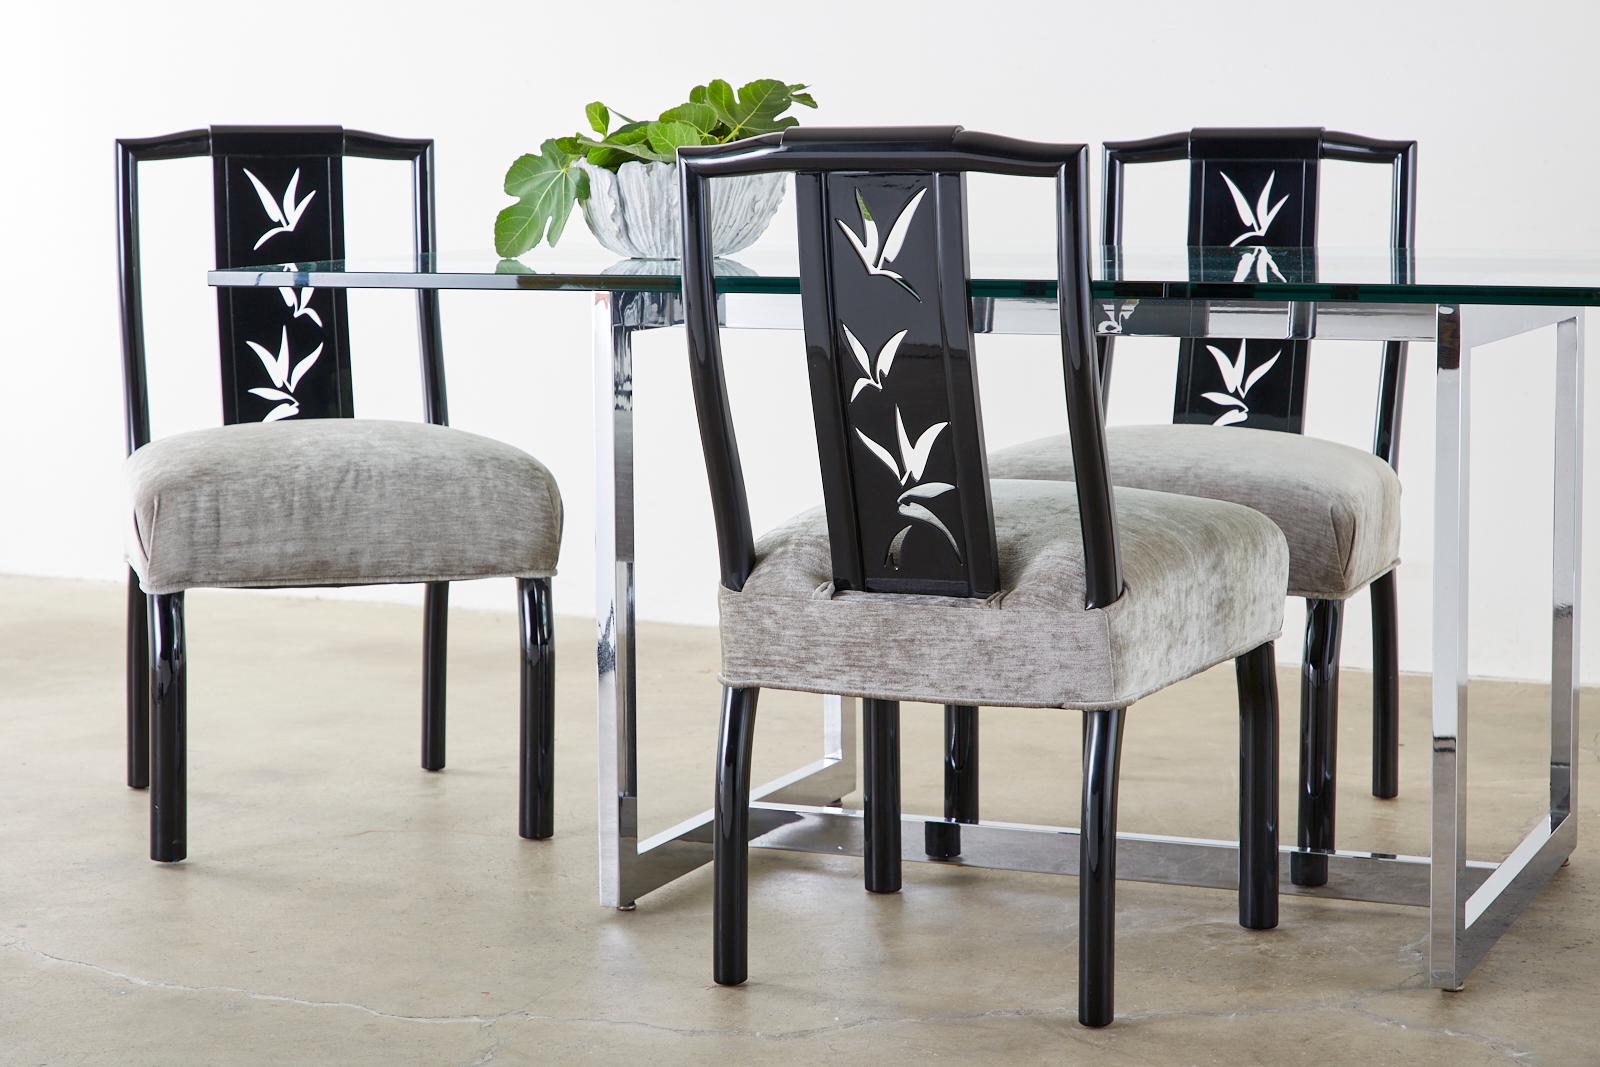 Magnificent set of eight black lacquered Mid-Century Modern dining chairs designed by James Mont. The chairs feature an Asian foliate motif decorated back splat with a dramatic high gloss lacquer finish. The frames are made of thick round hardwood